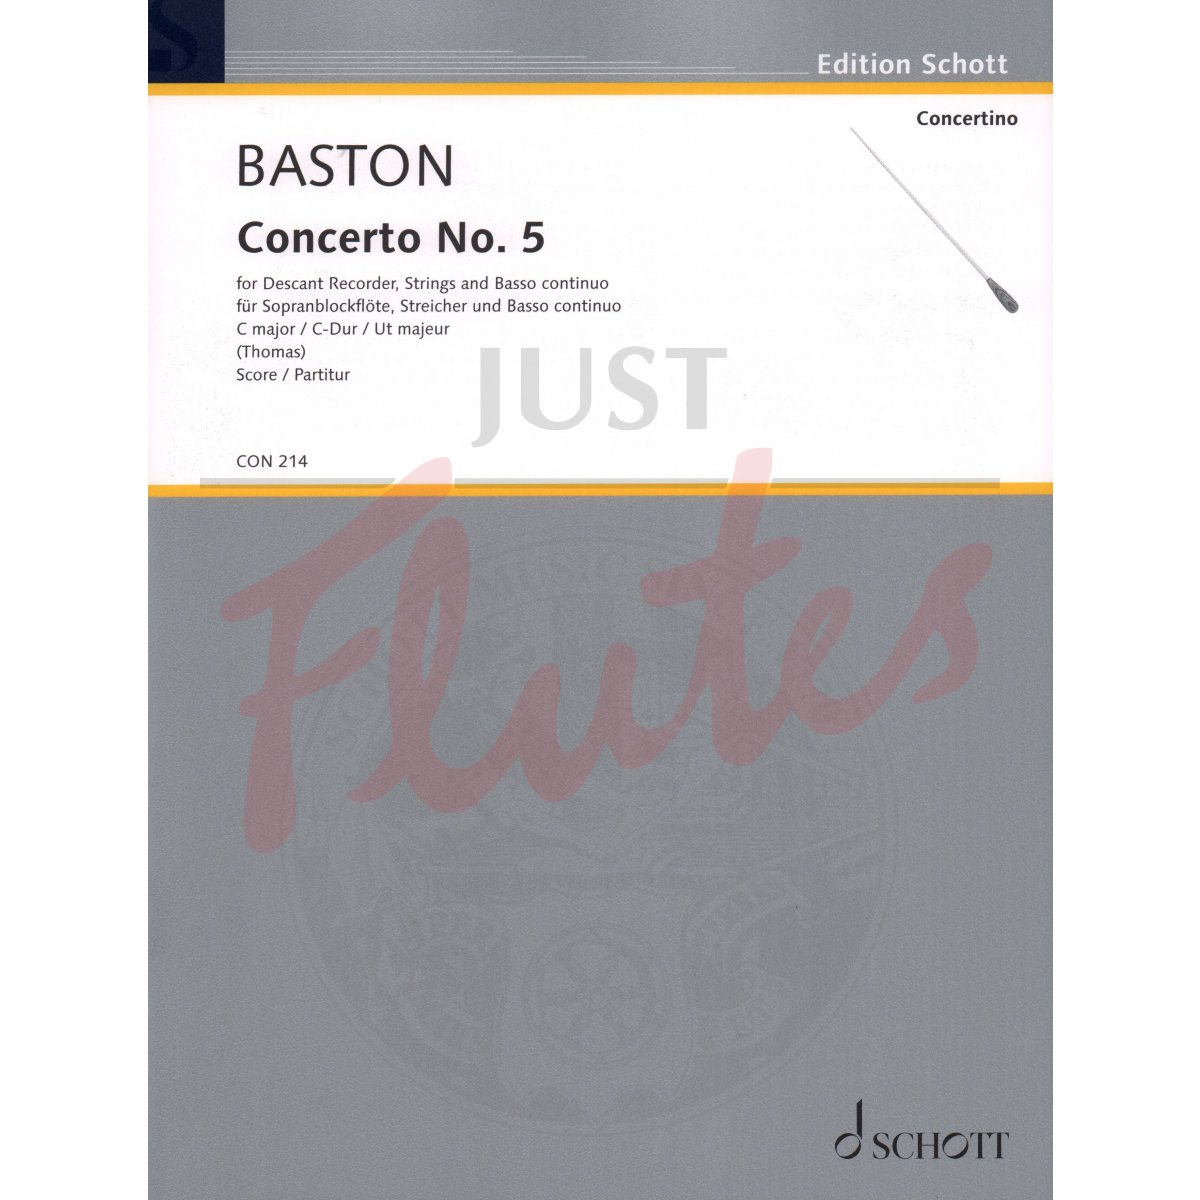 Concerto No. 5 in C major for Descant Recorder, Strings and Basso Continuo